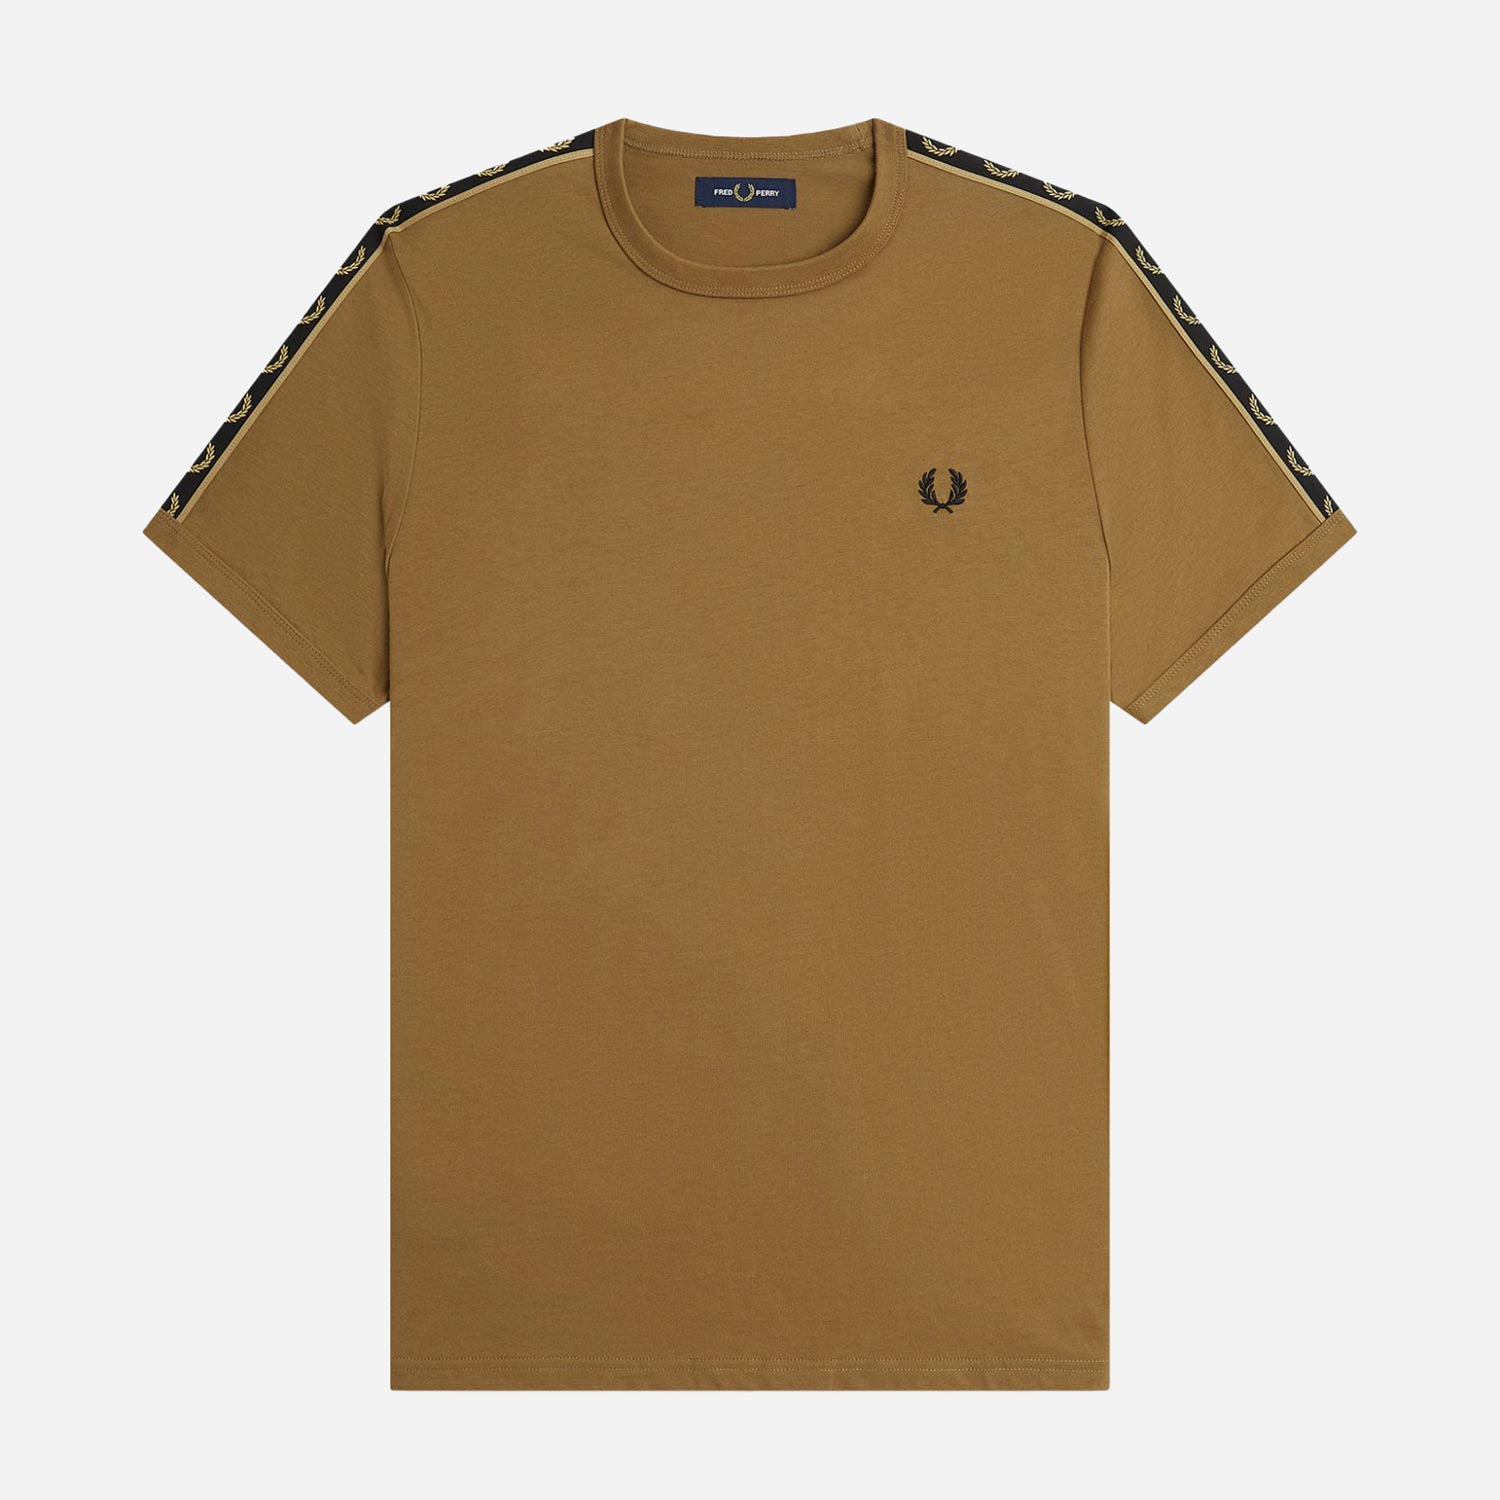 Fred Perry Contrast Tape Ringer Regular Fit Short Sleeve Tee - Shaded Stone/Black